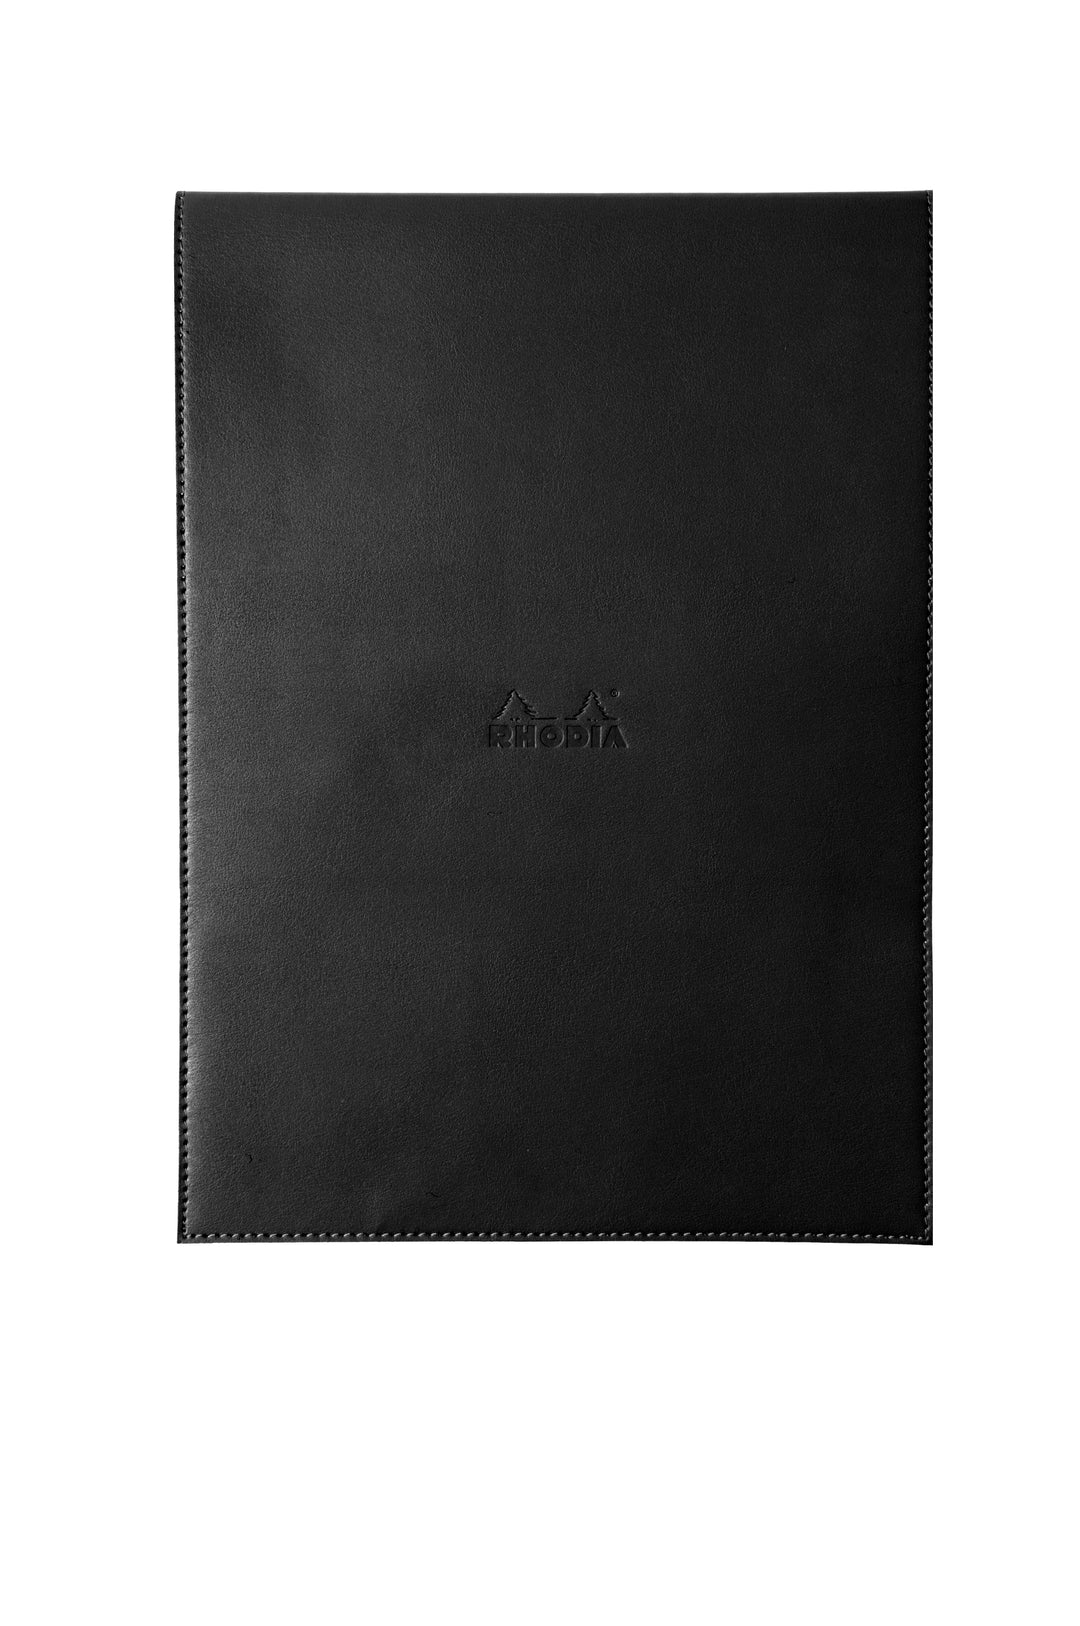 Rhodia Boutique Black Stapled Line Ruled Notepad with Leatherette Cover - A4